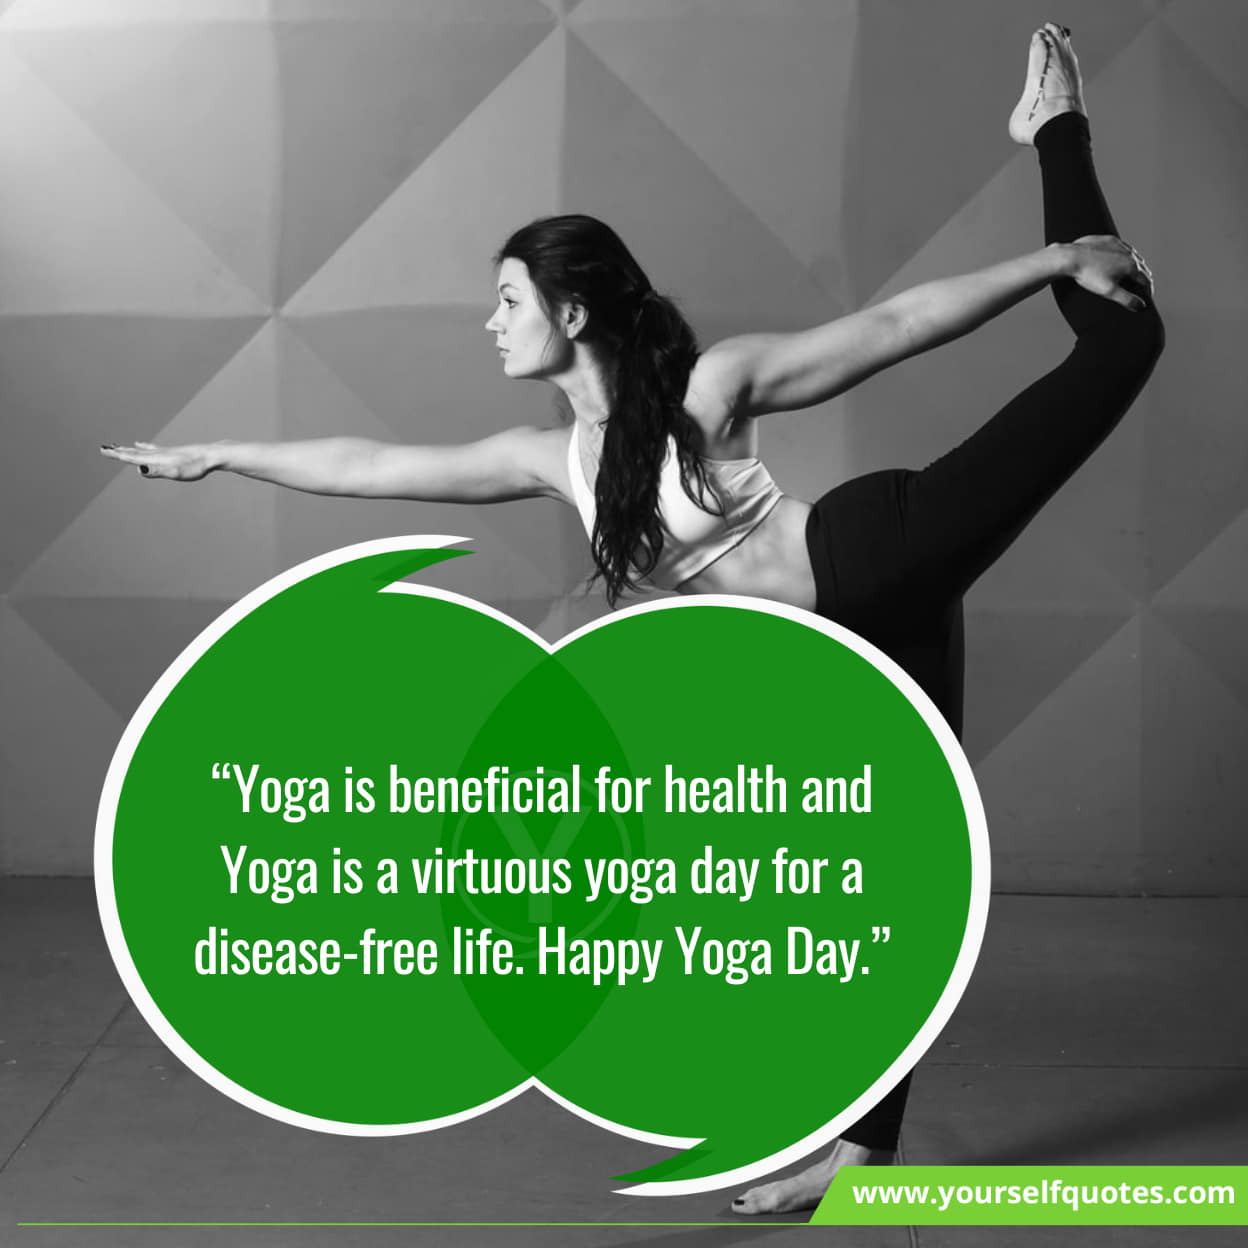 Yoga Day Quotes On Health Benefits